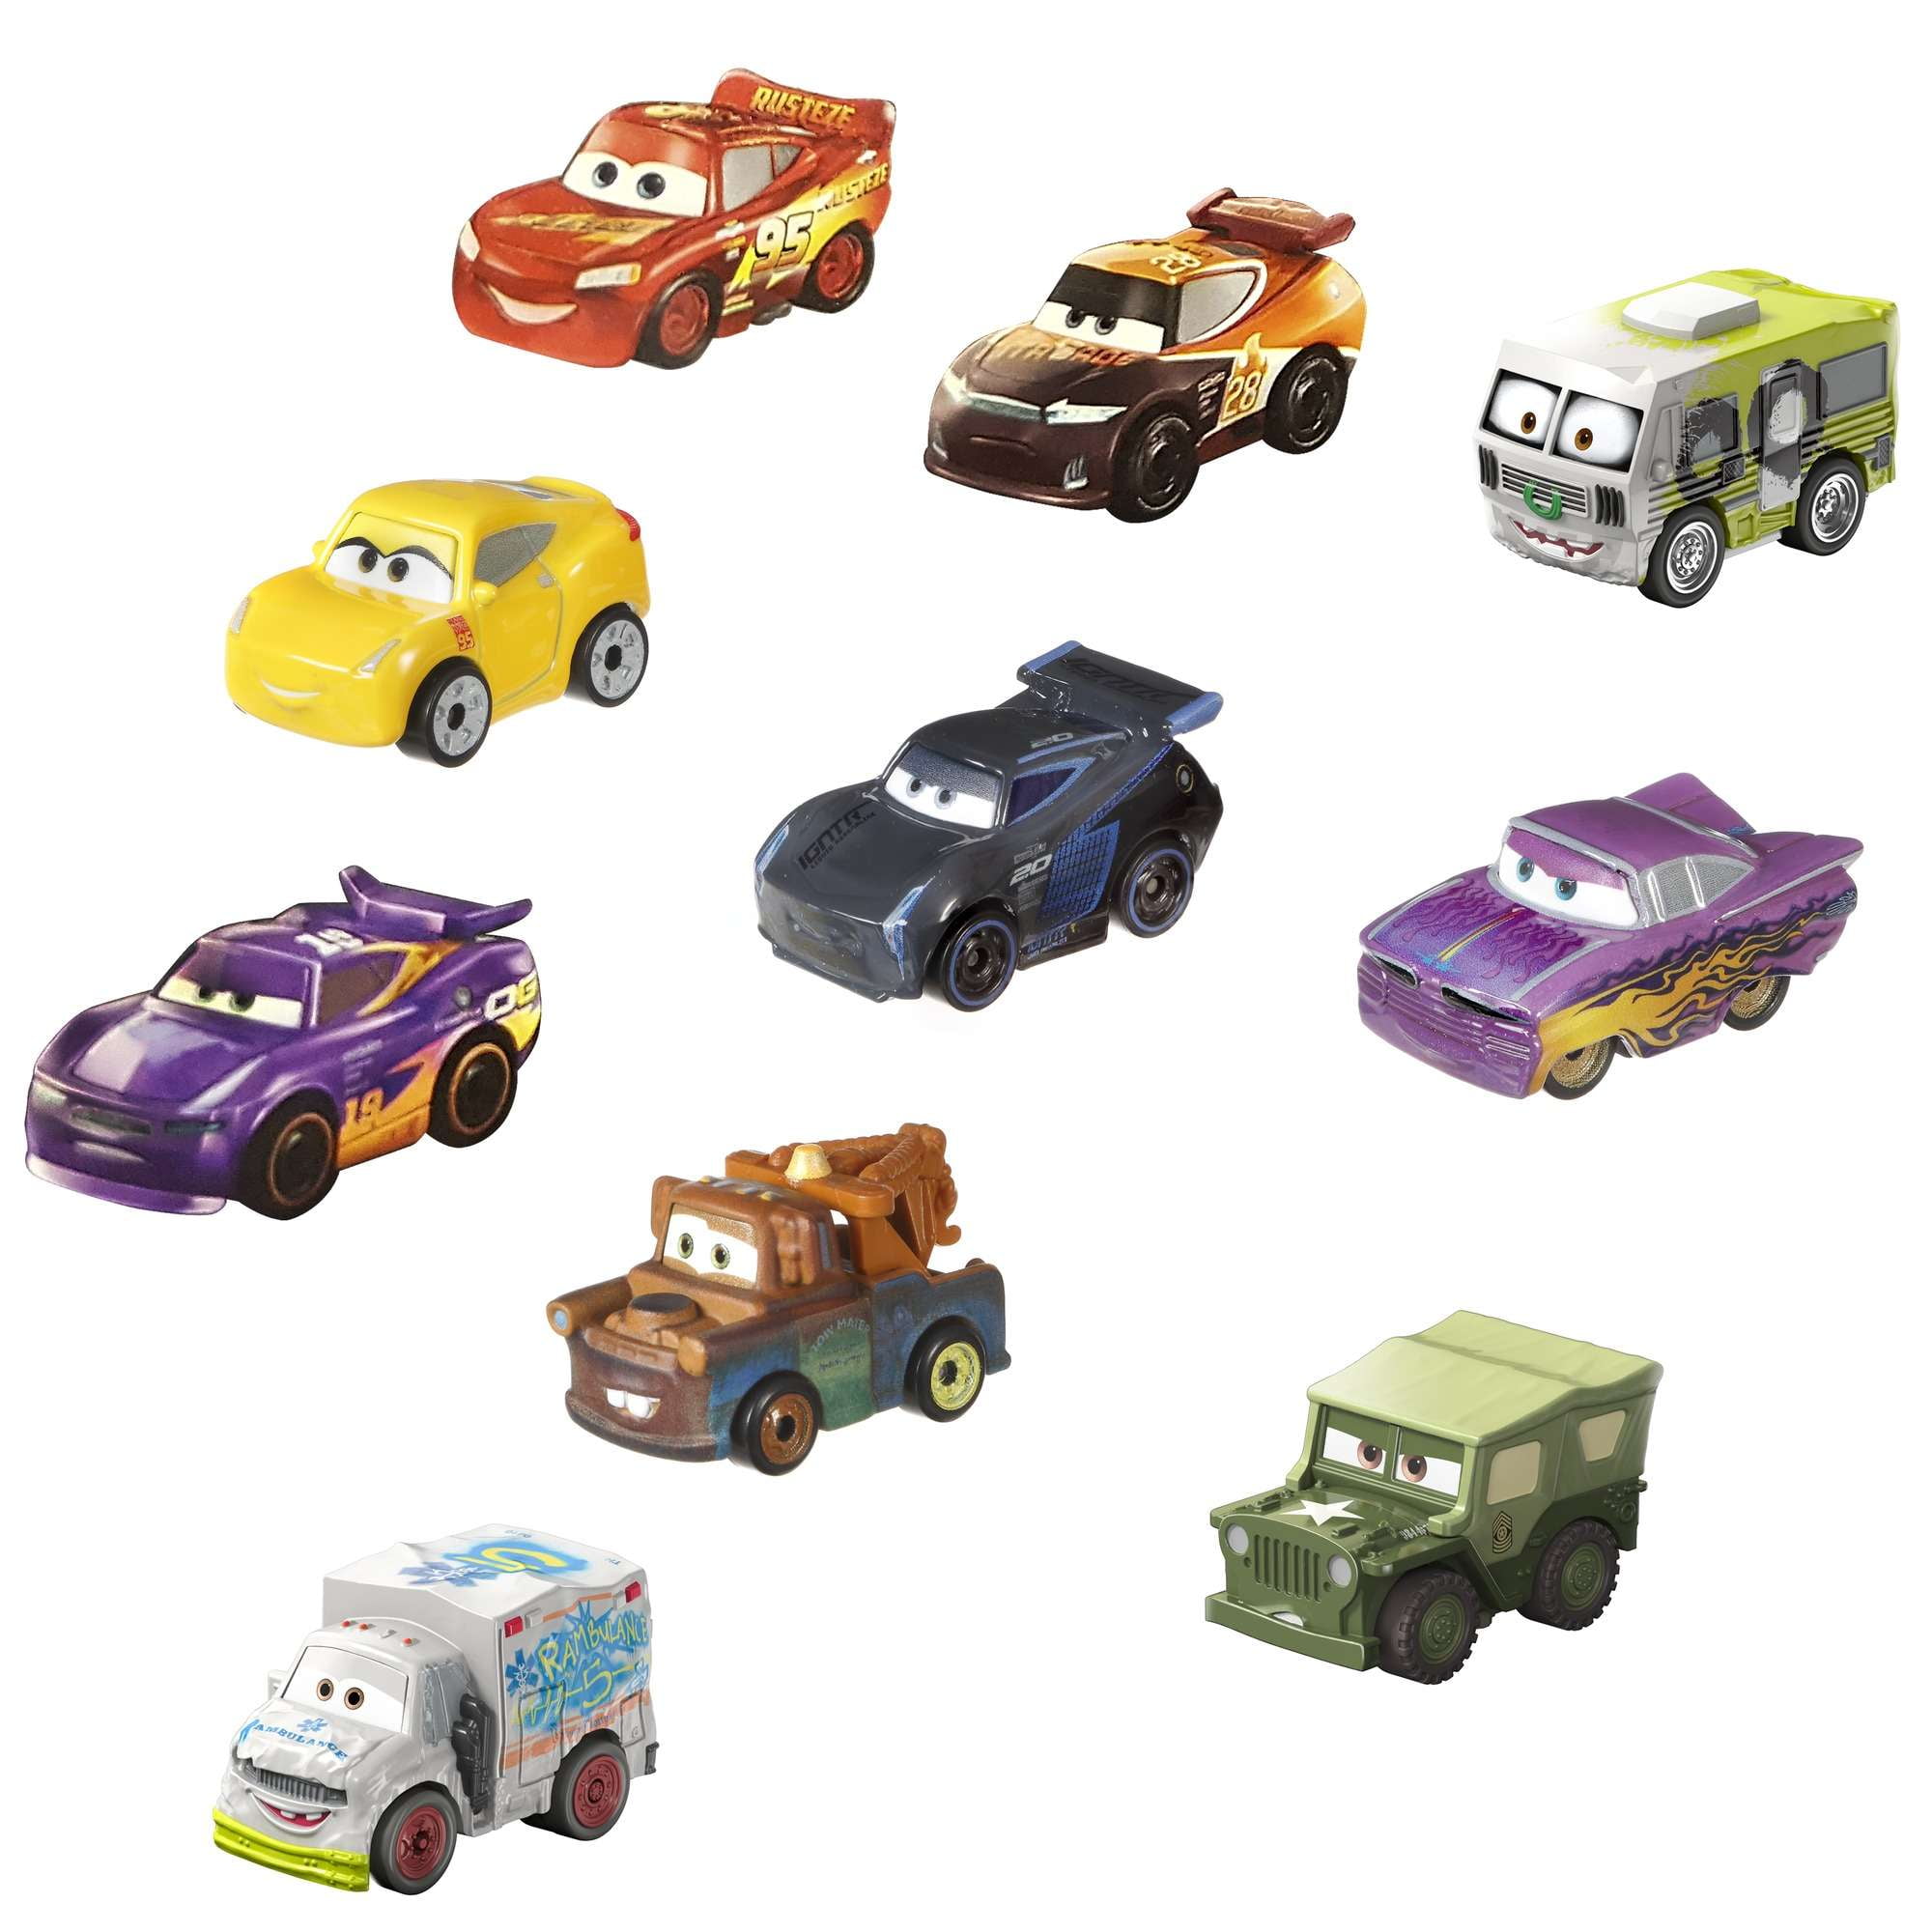 Disney Pixar Cars Mini Racers Derby Racers Series 10-Pack, Collectible  Compact Movie Vehicles